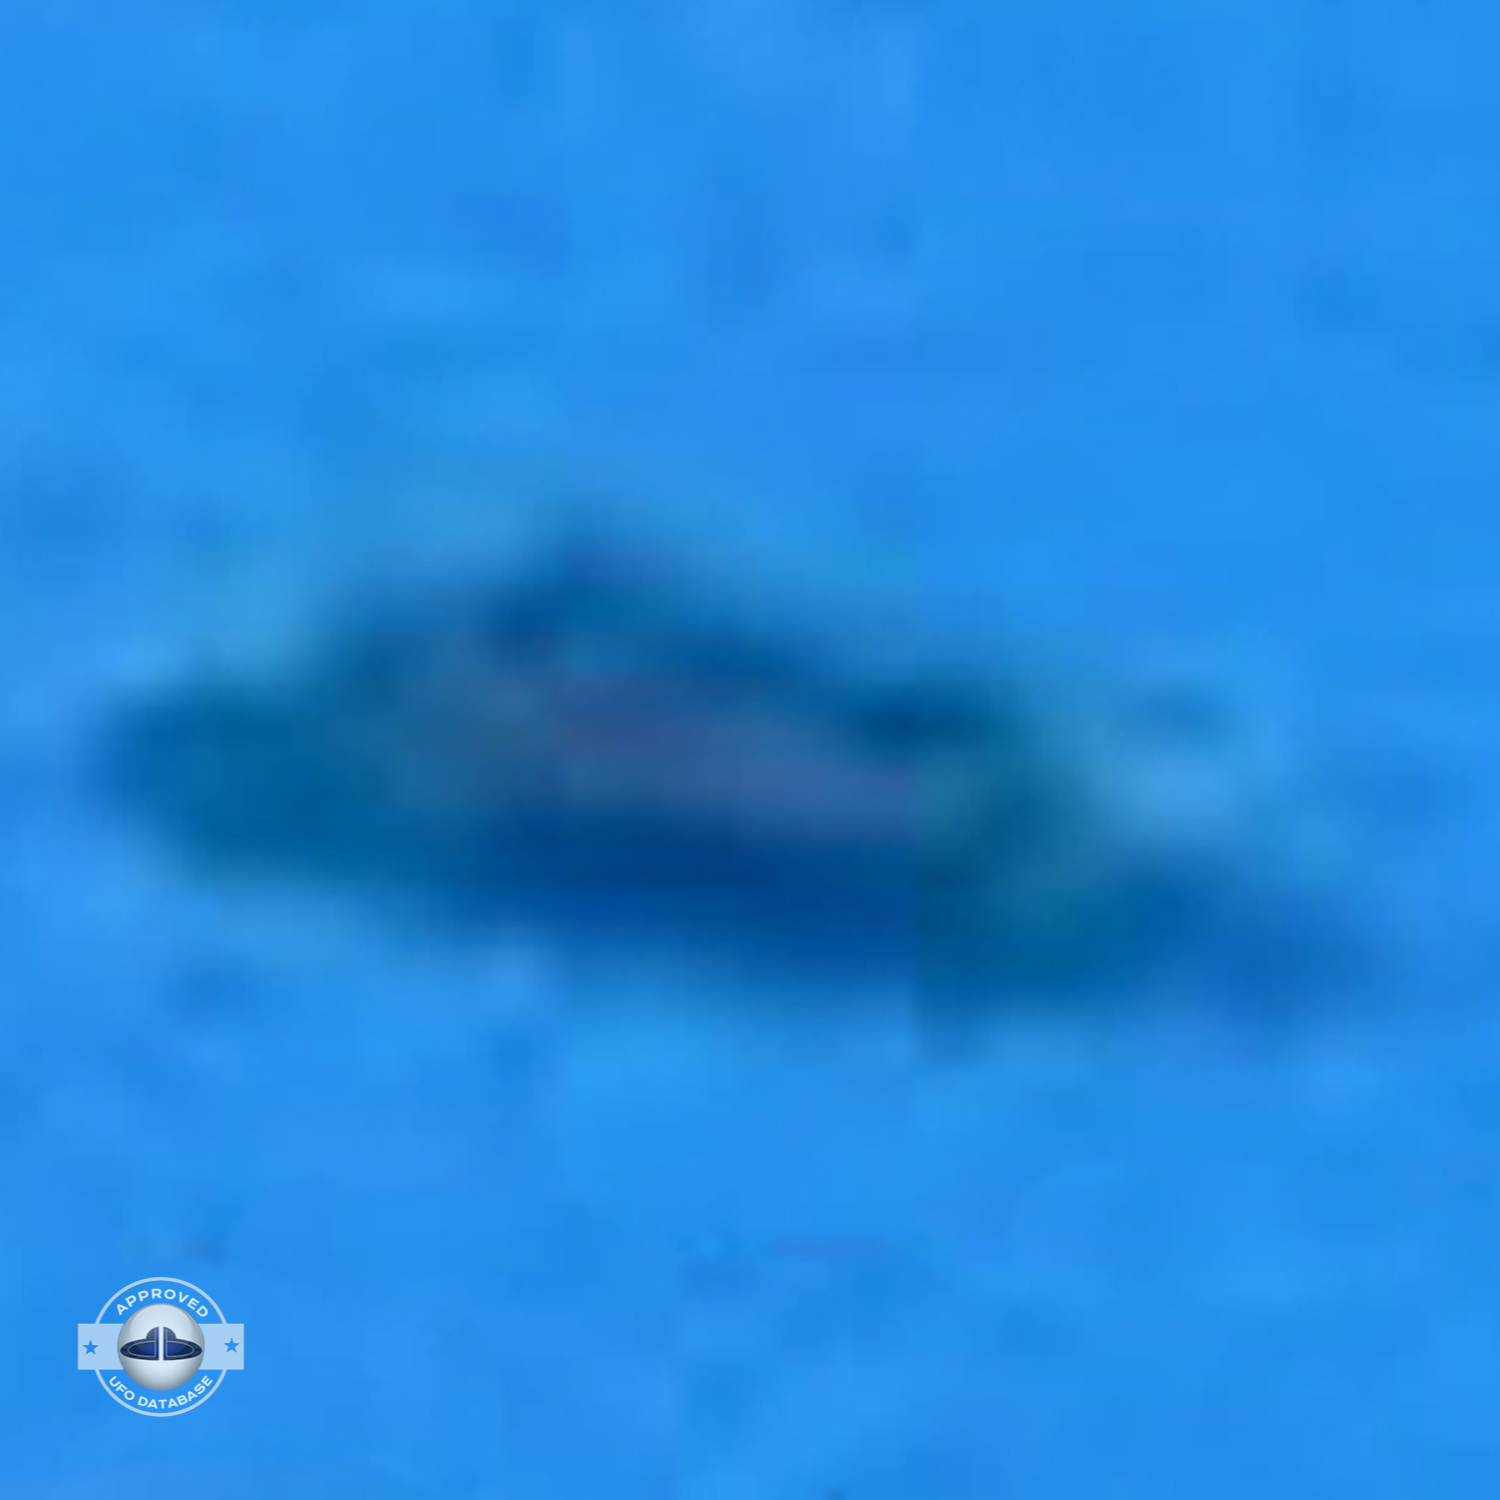 Picture of UFO near airplane over Vnukovo Airport | Moscow, Russia UFO Picture #179-6